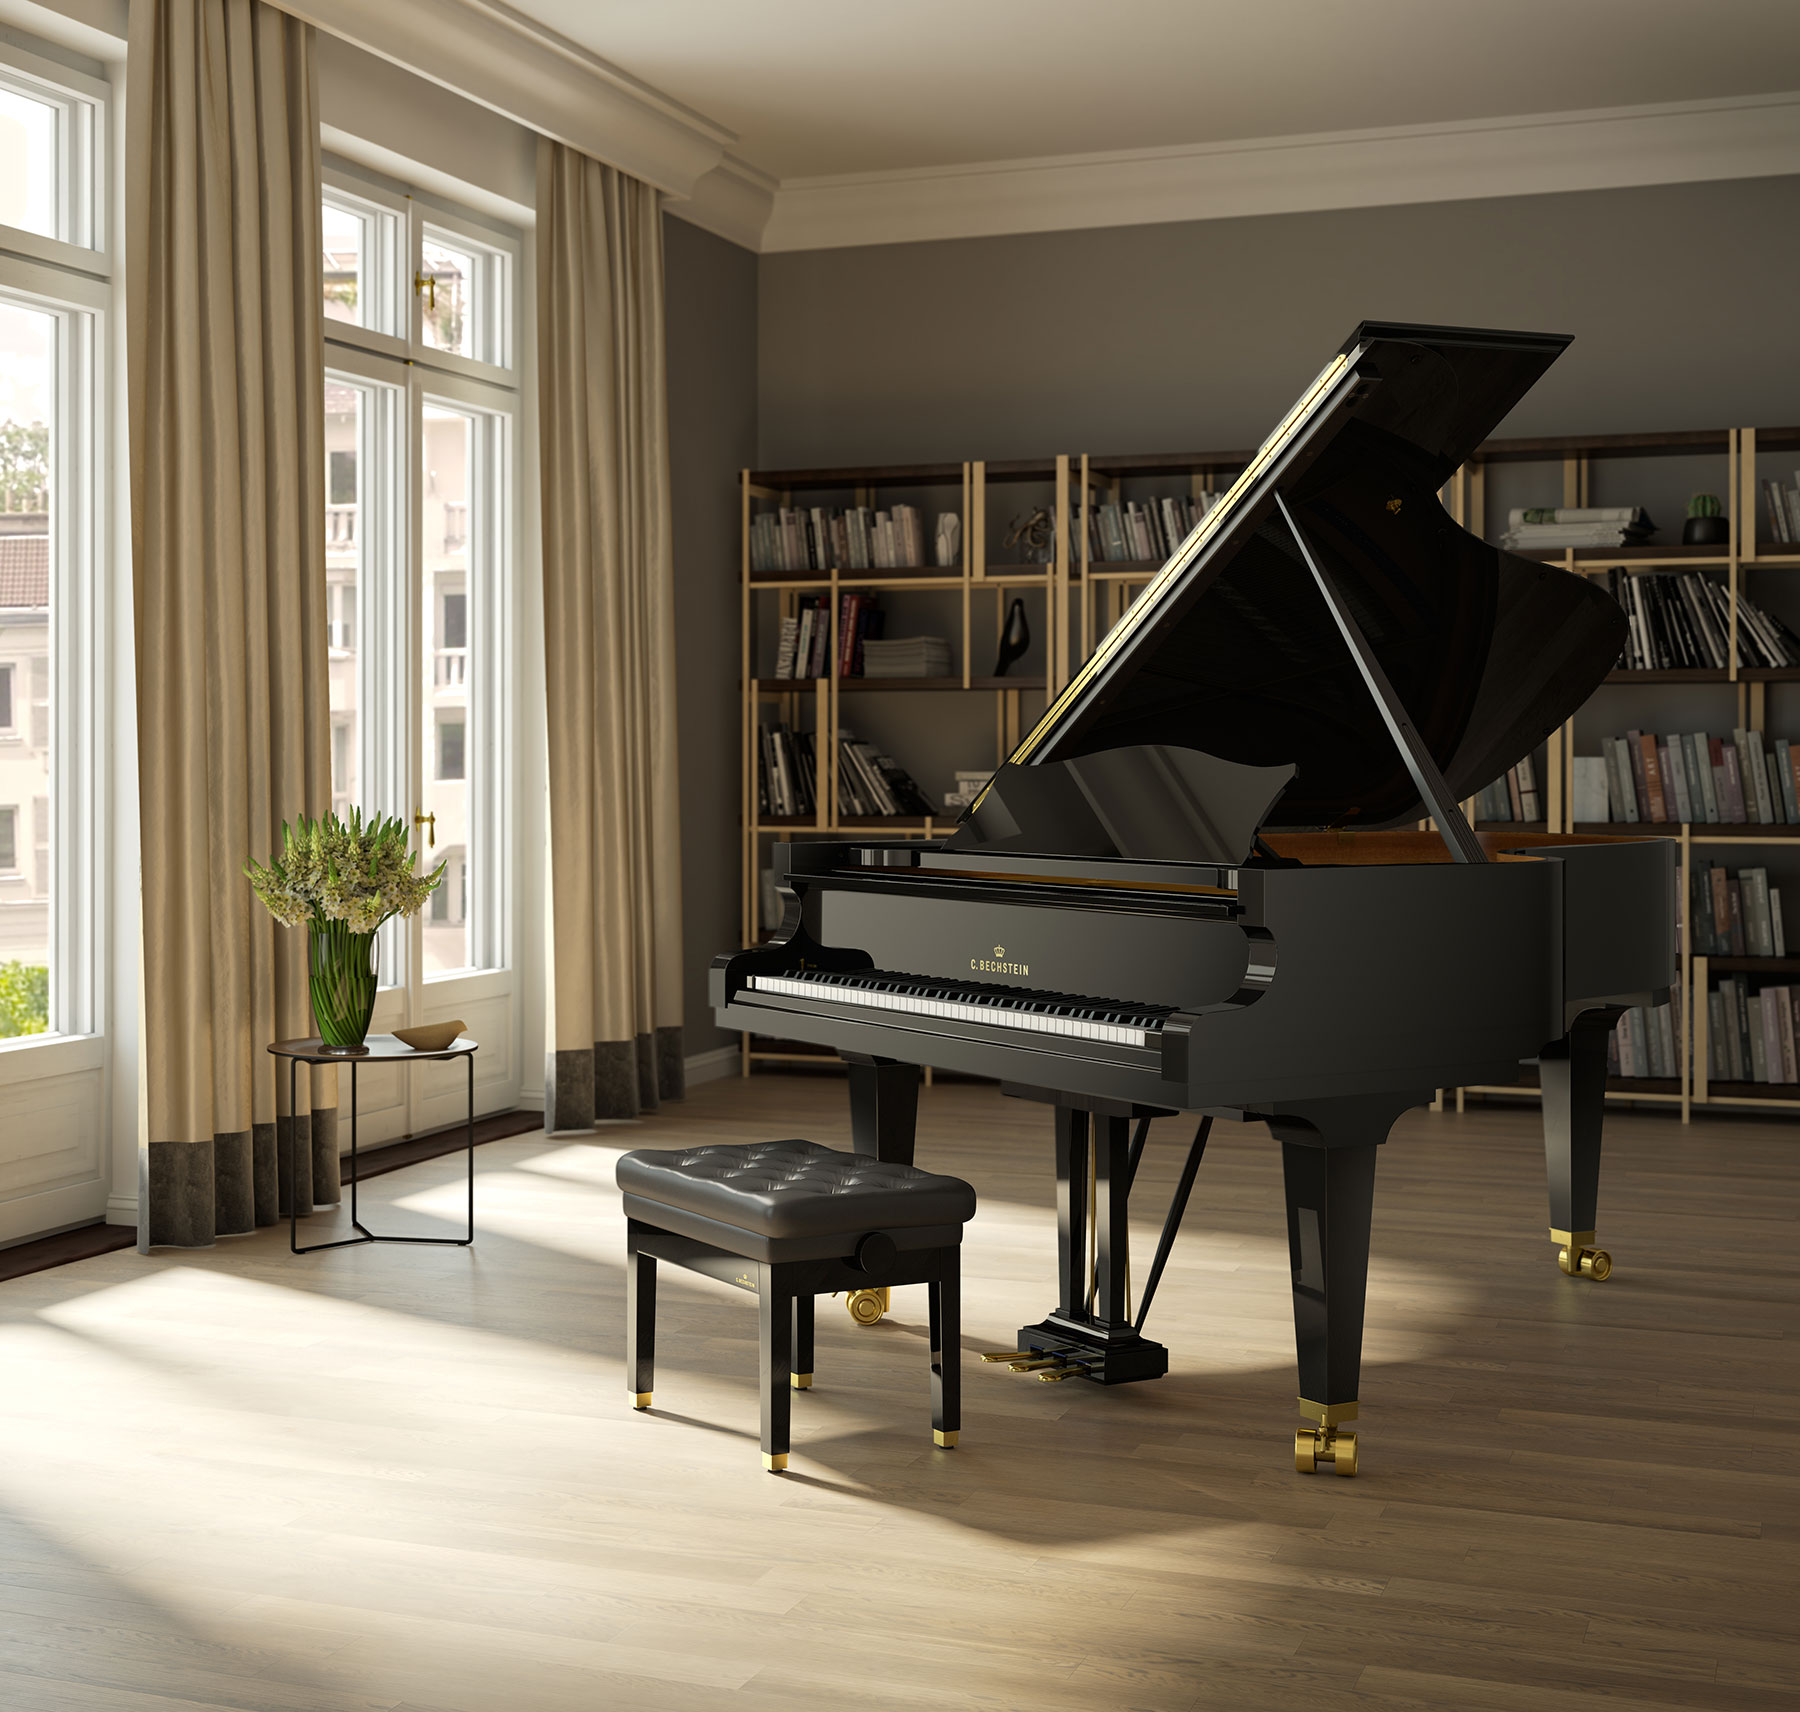 C. Bechstein grand piano in a city apartment